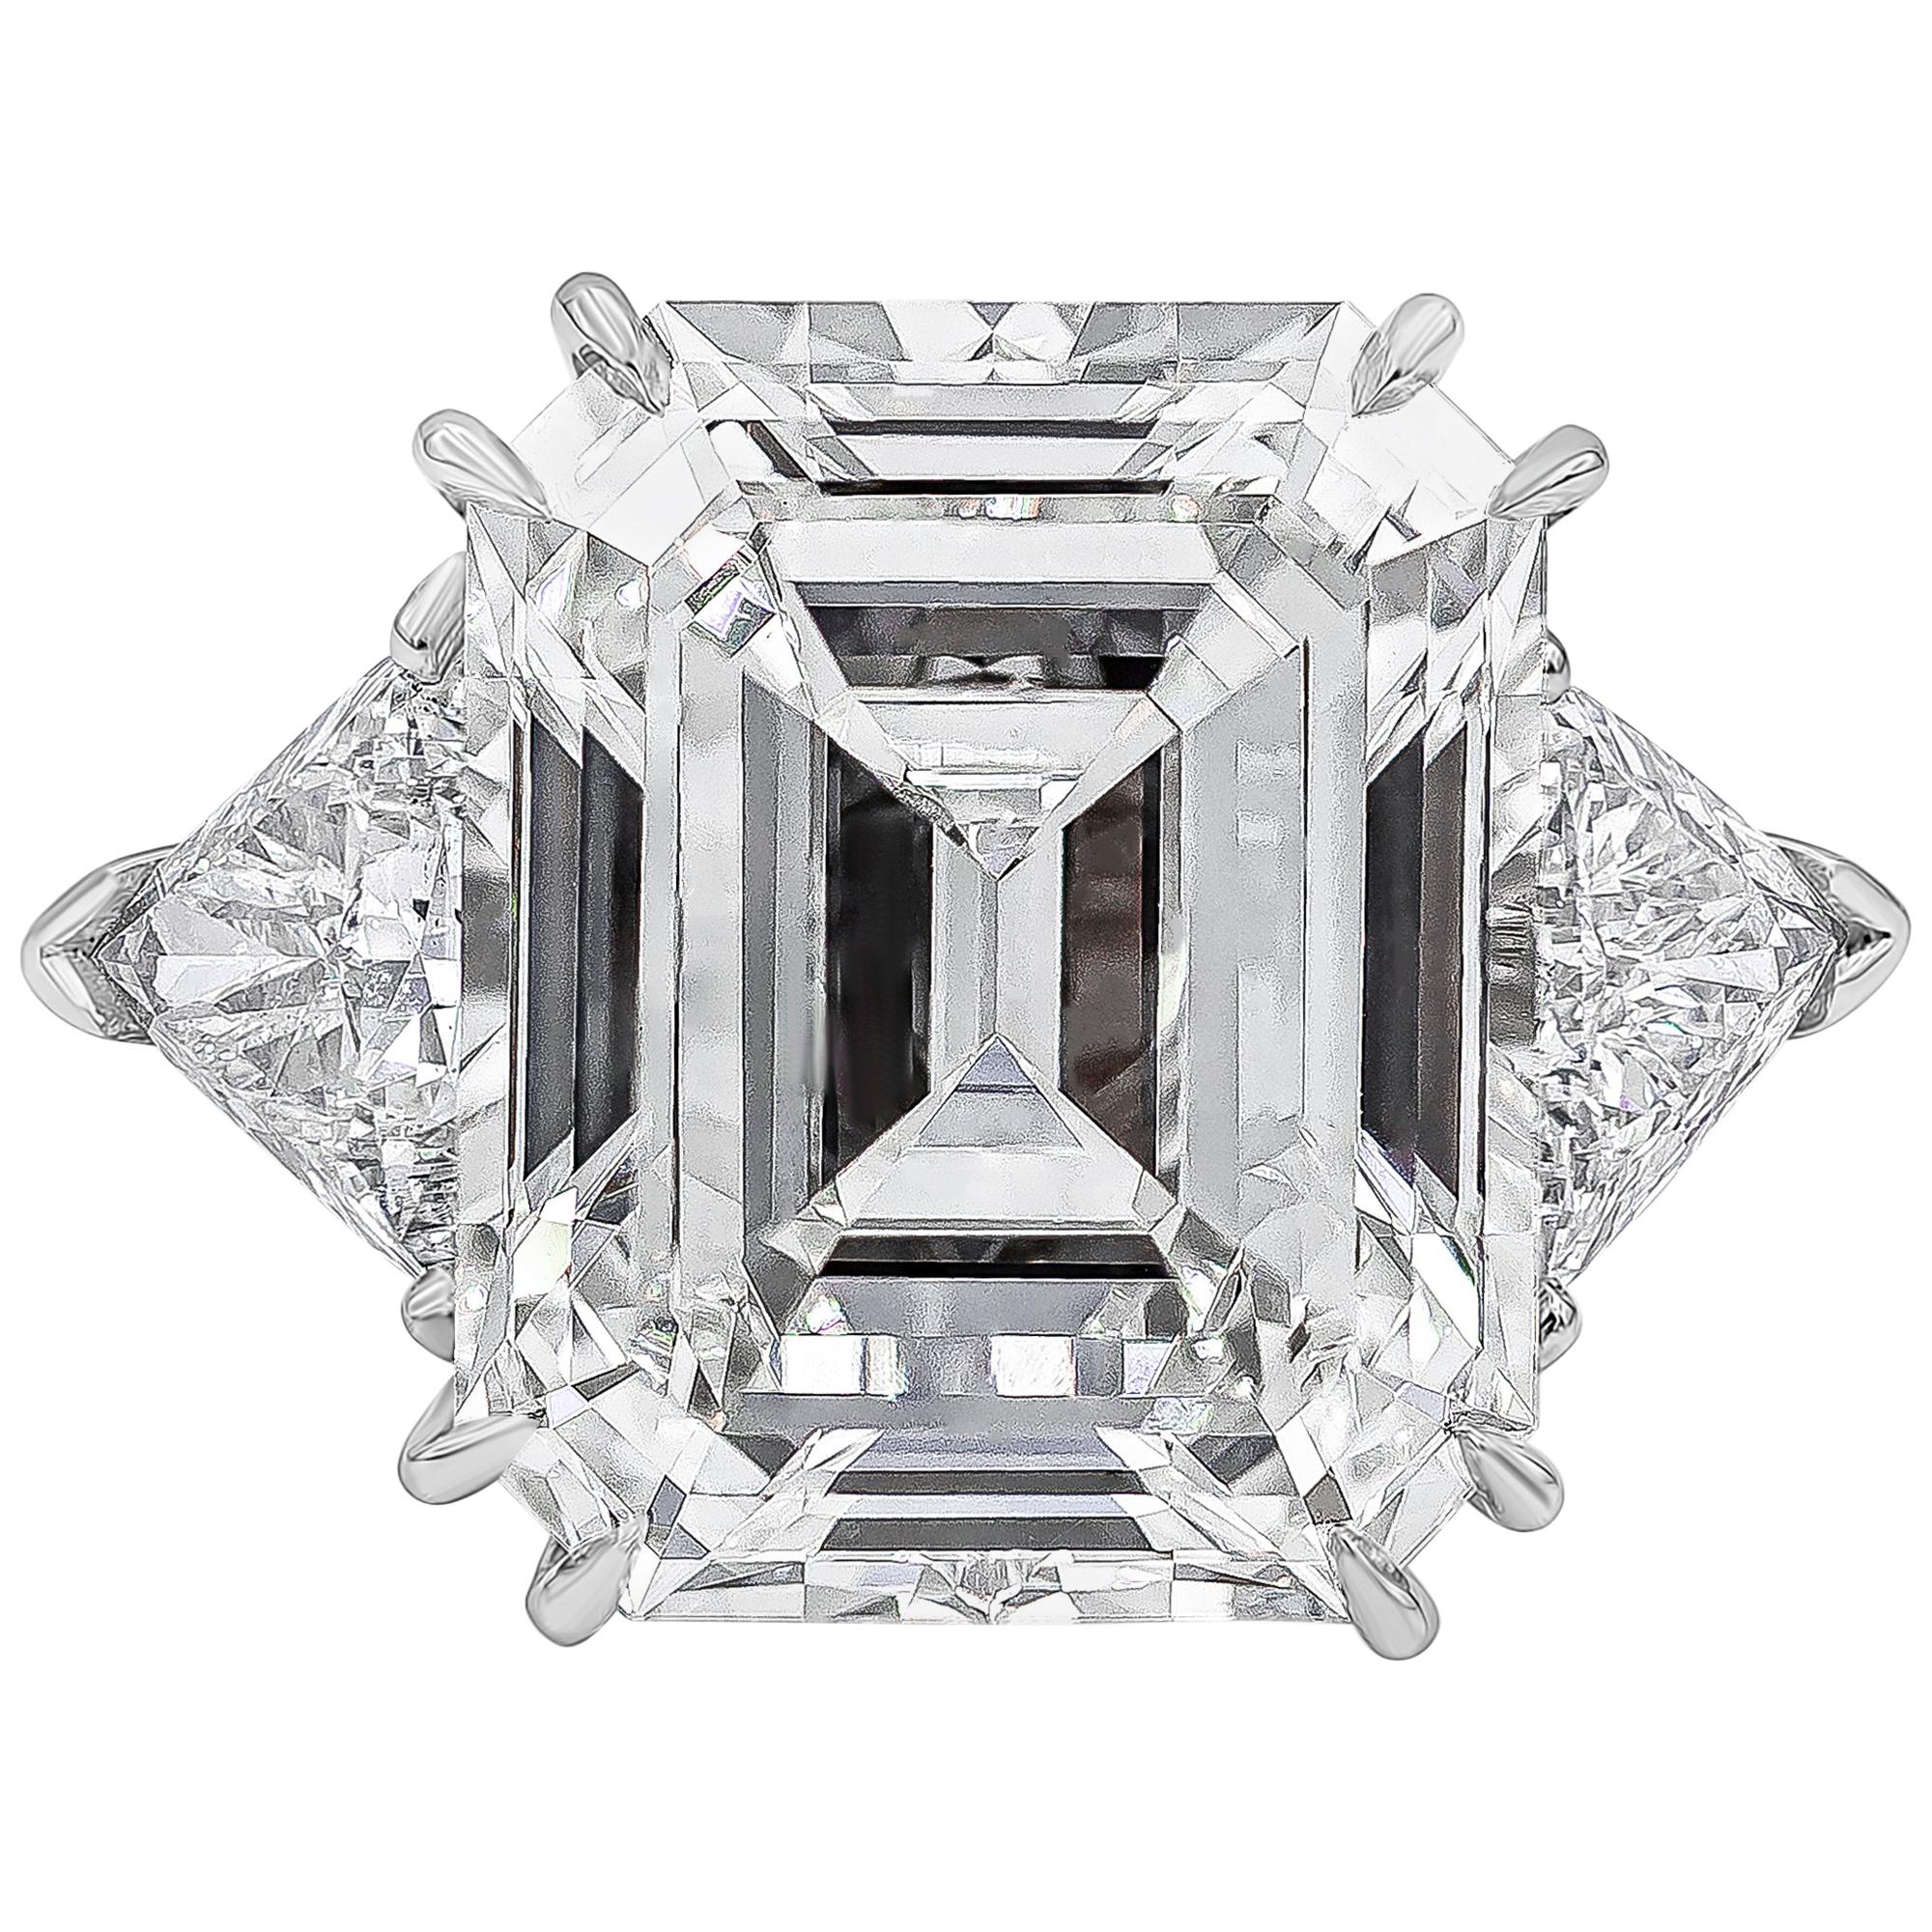 Finely made and well crafted three stone engagement ring featuring a 15.34 carats emerald cut diamond certified by GIA as H color and VS1 in clarity. Flanked by trillion cut diamonds on each side. Accent diamonds weigh 2.15 carats total, H color and